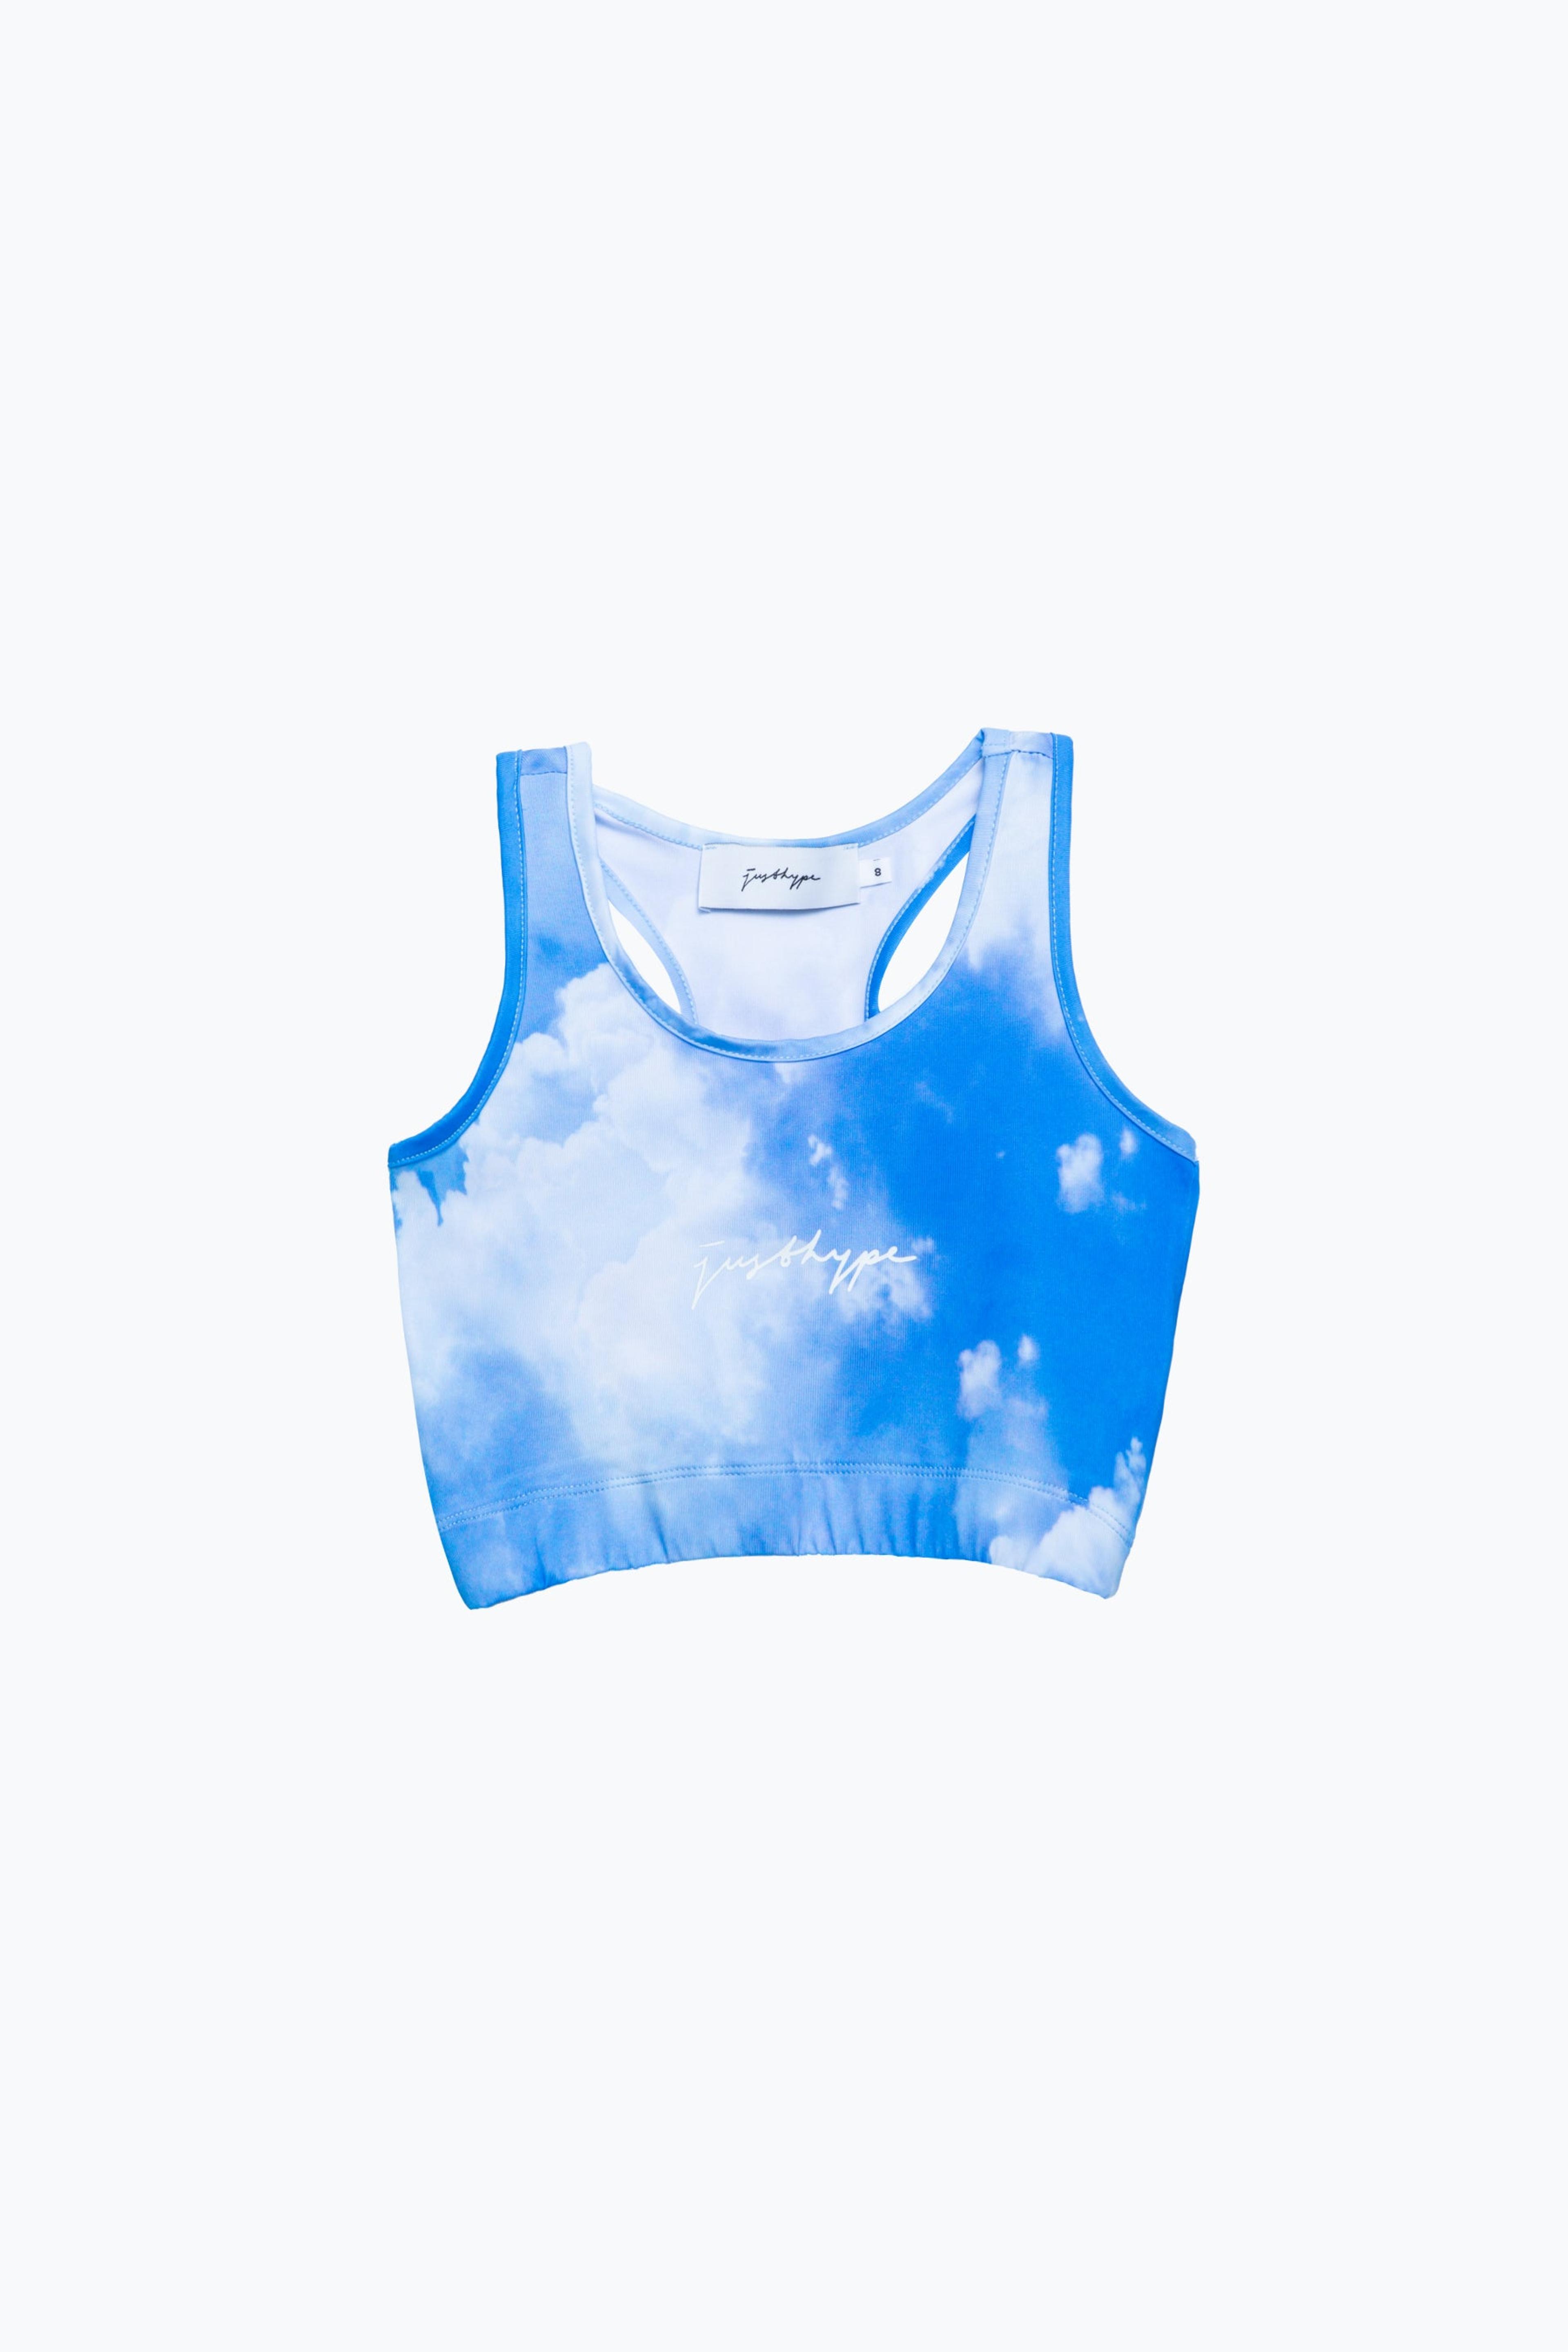 Alternate View 4 of HYPE CLOUDS WOMEN'S BRALET